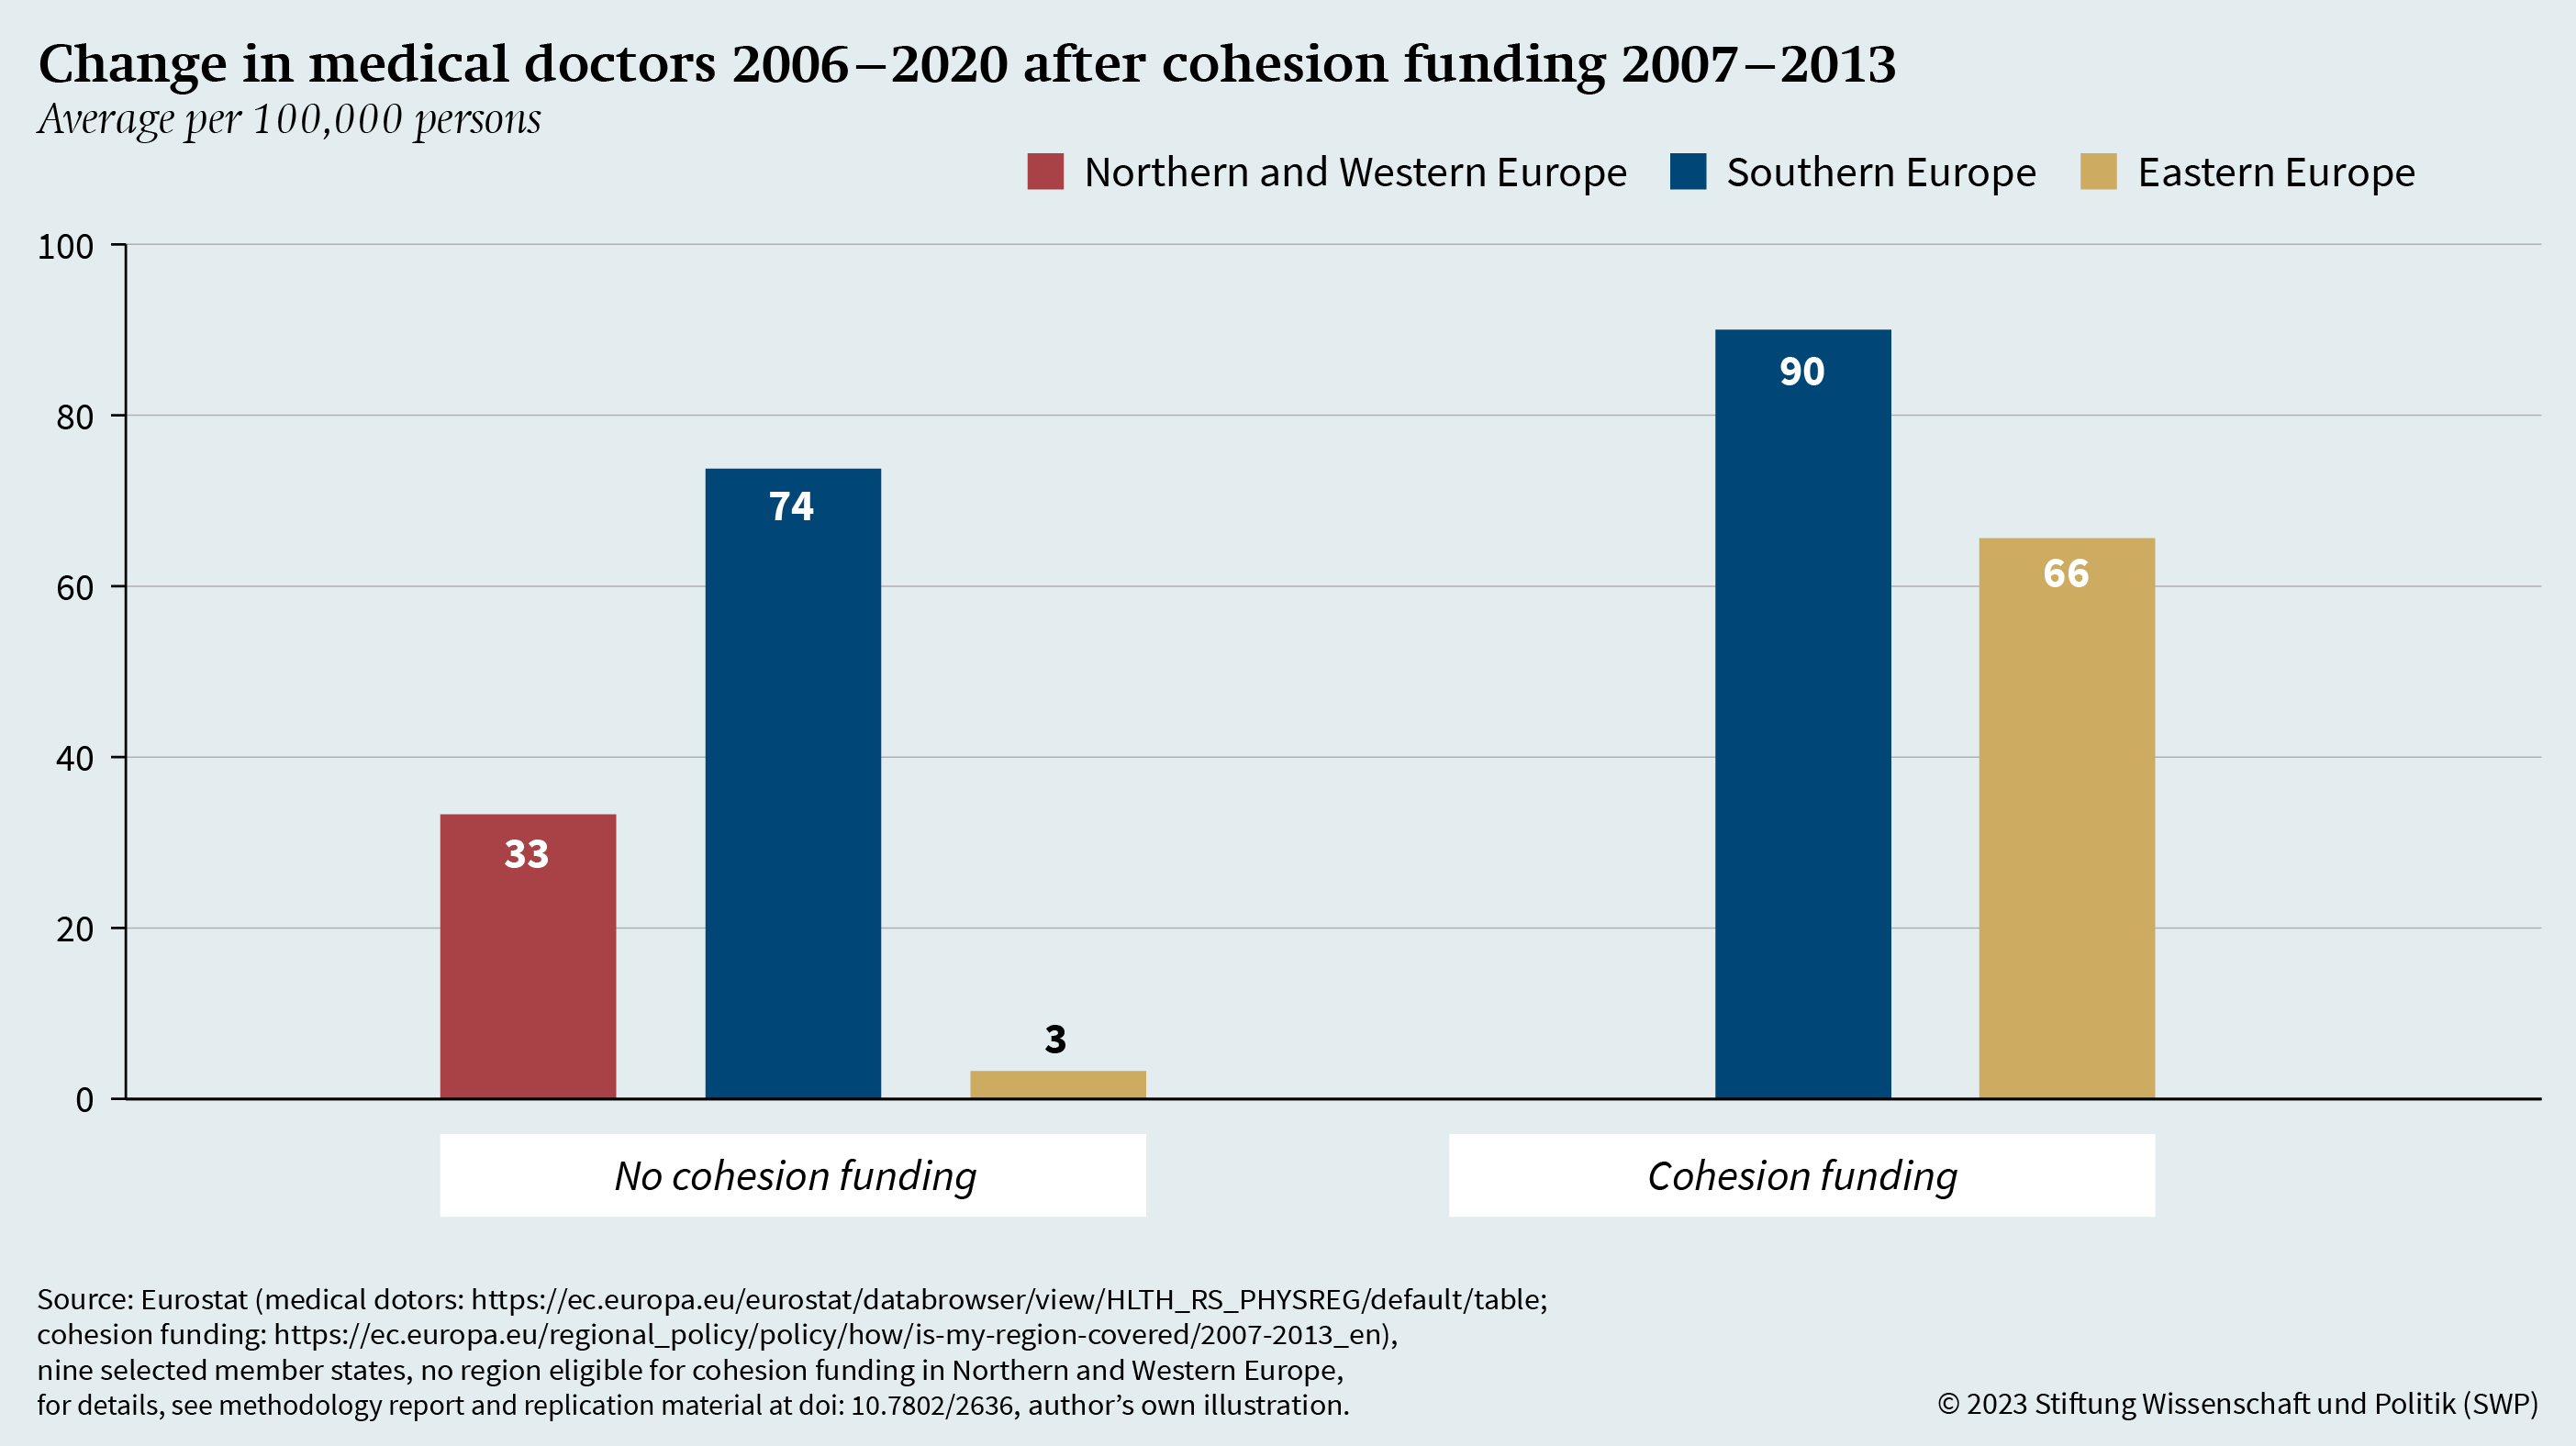 Figure 12: Change in medical doctors 2006–2020 after cohesion funding period 2007–2013